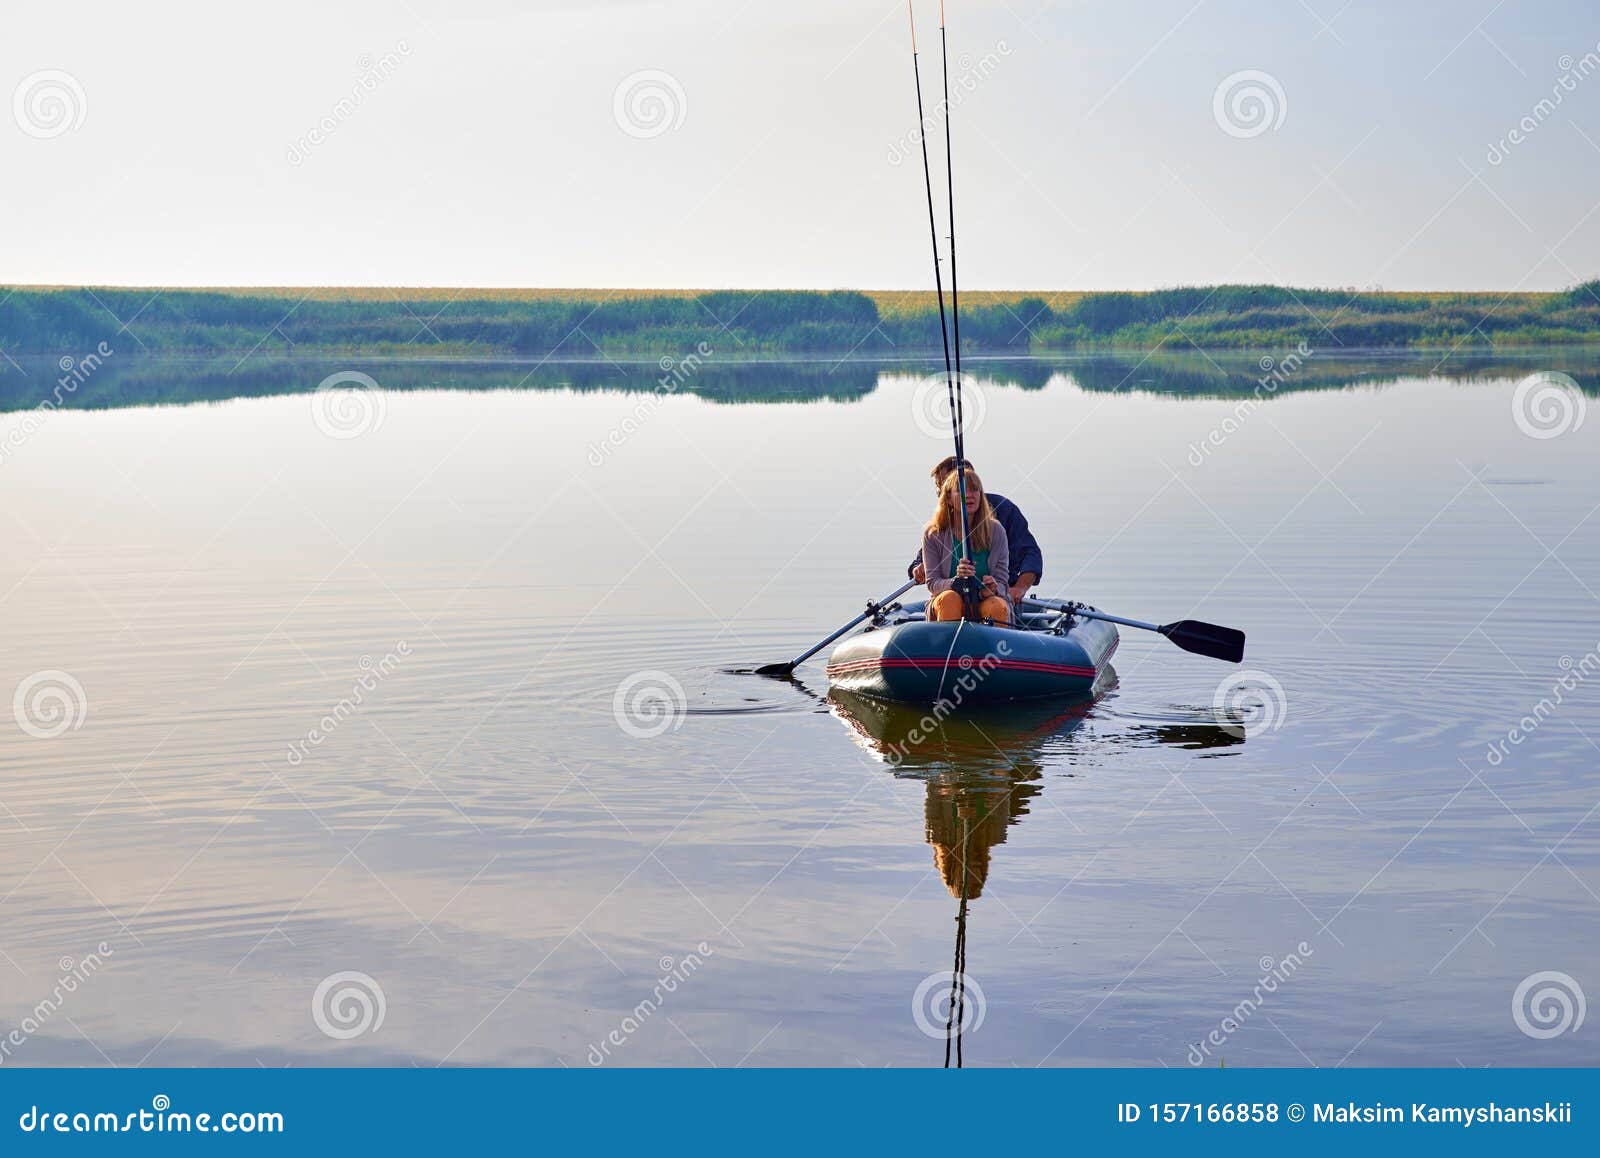 An Elderly People Fishing in Boat Around Forest Stock Photo